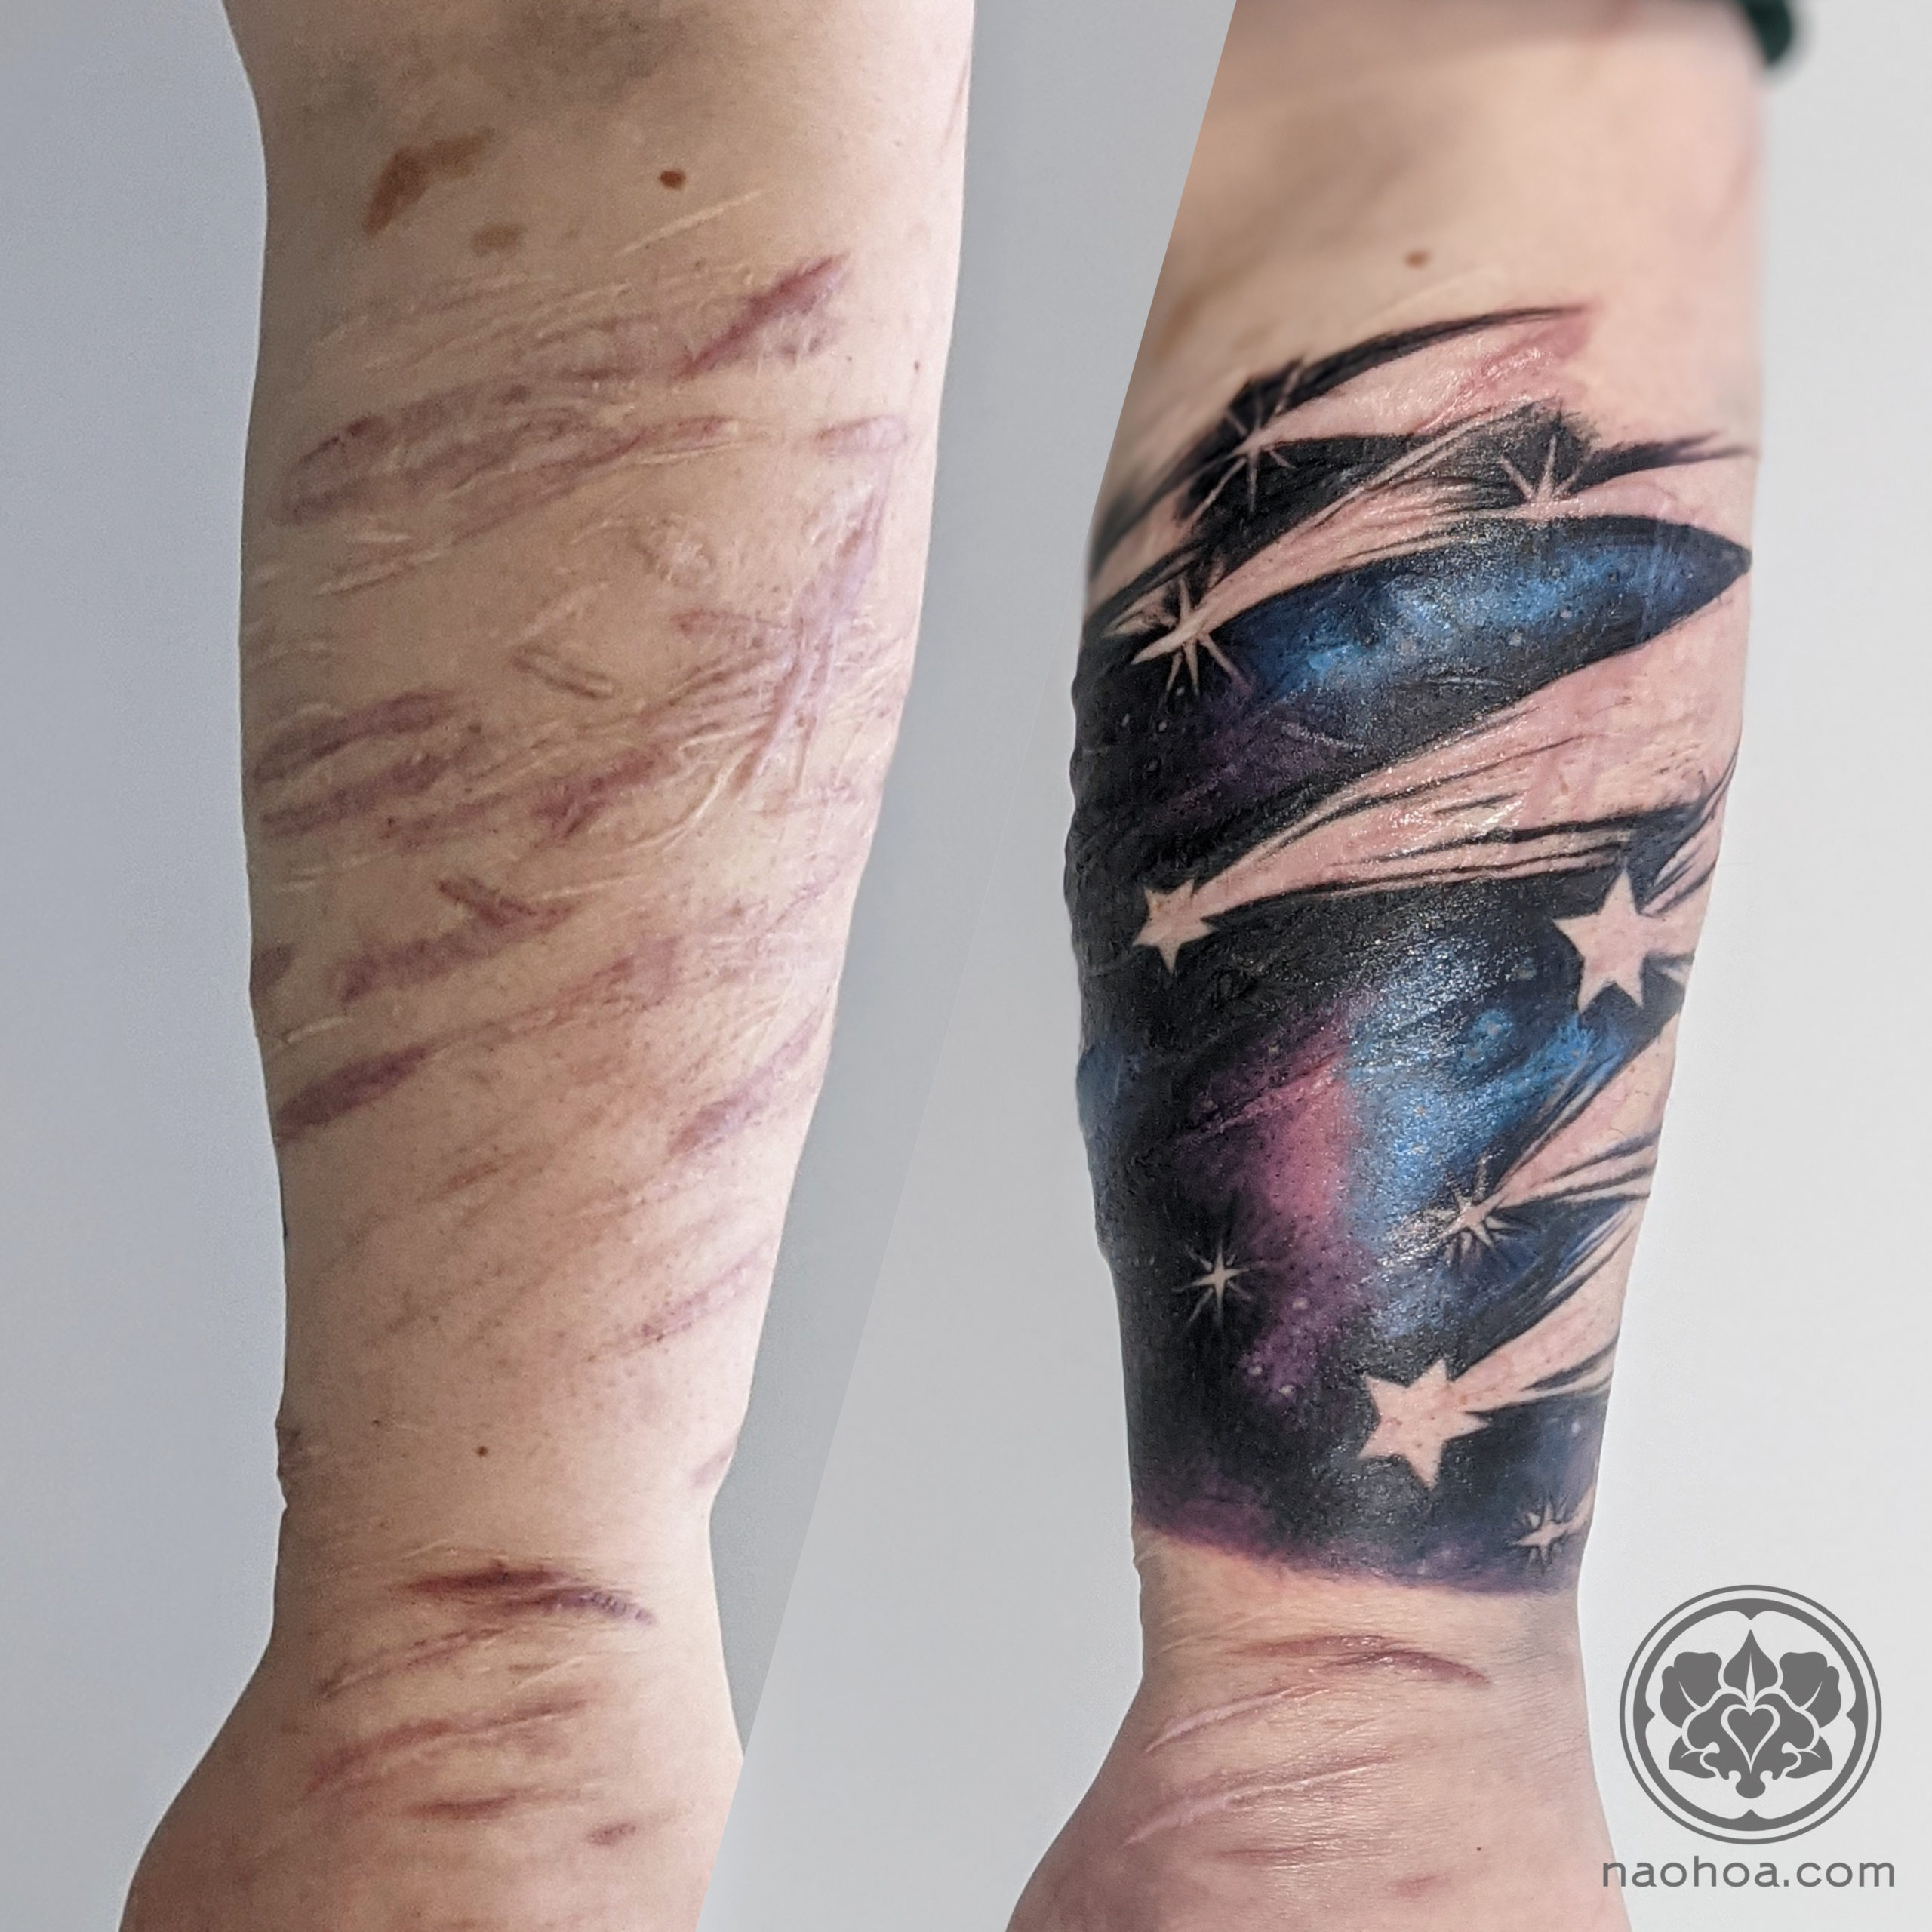 Tattoos over sh scars